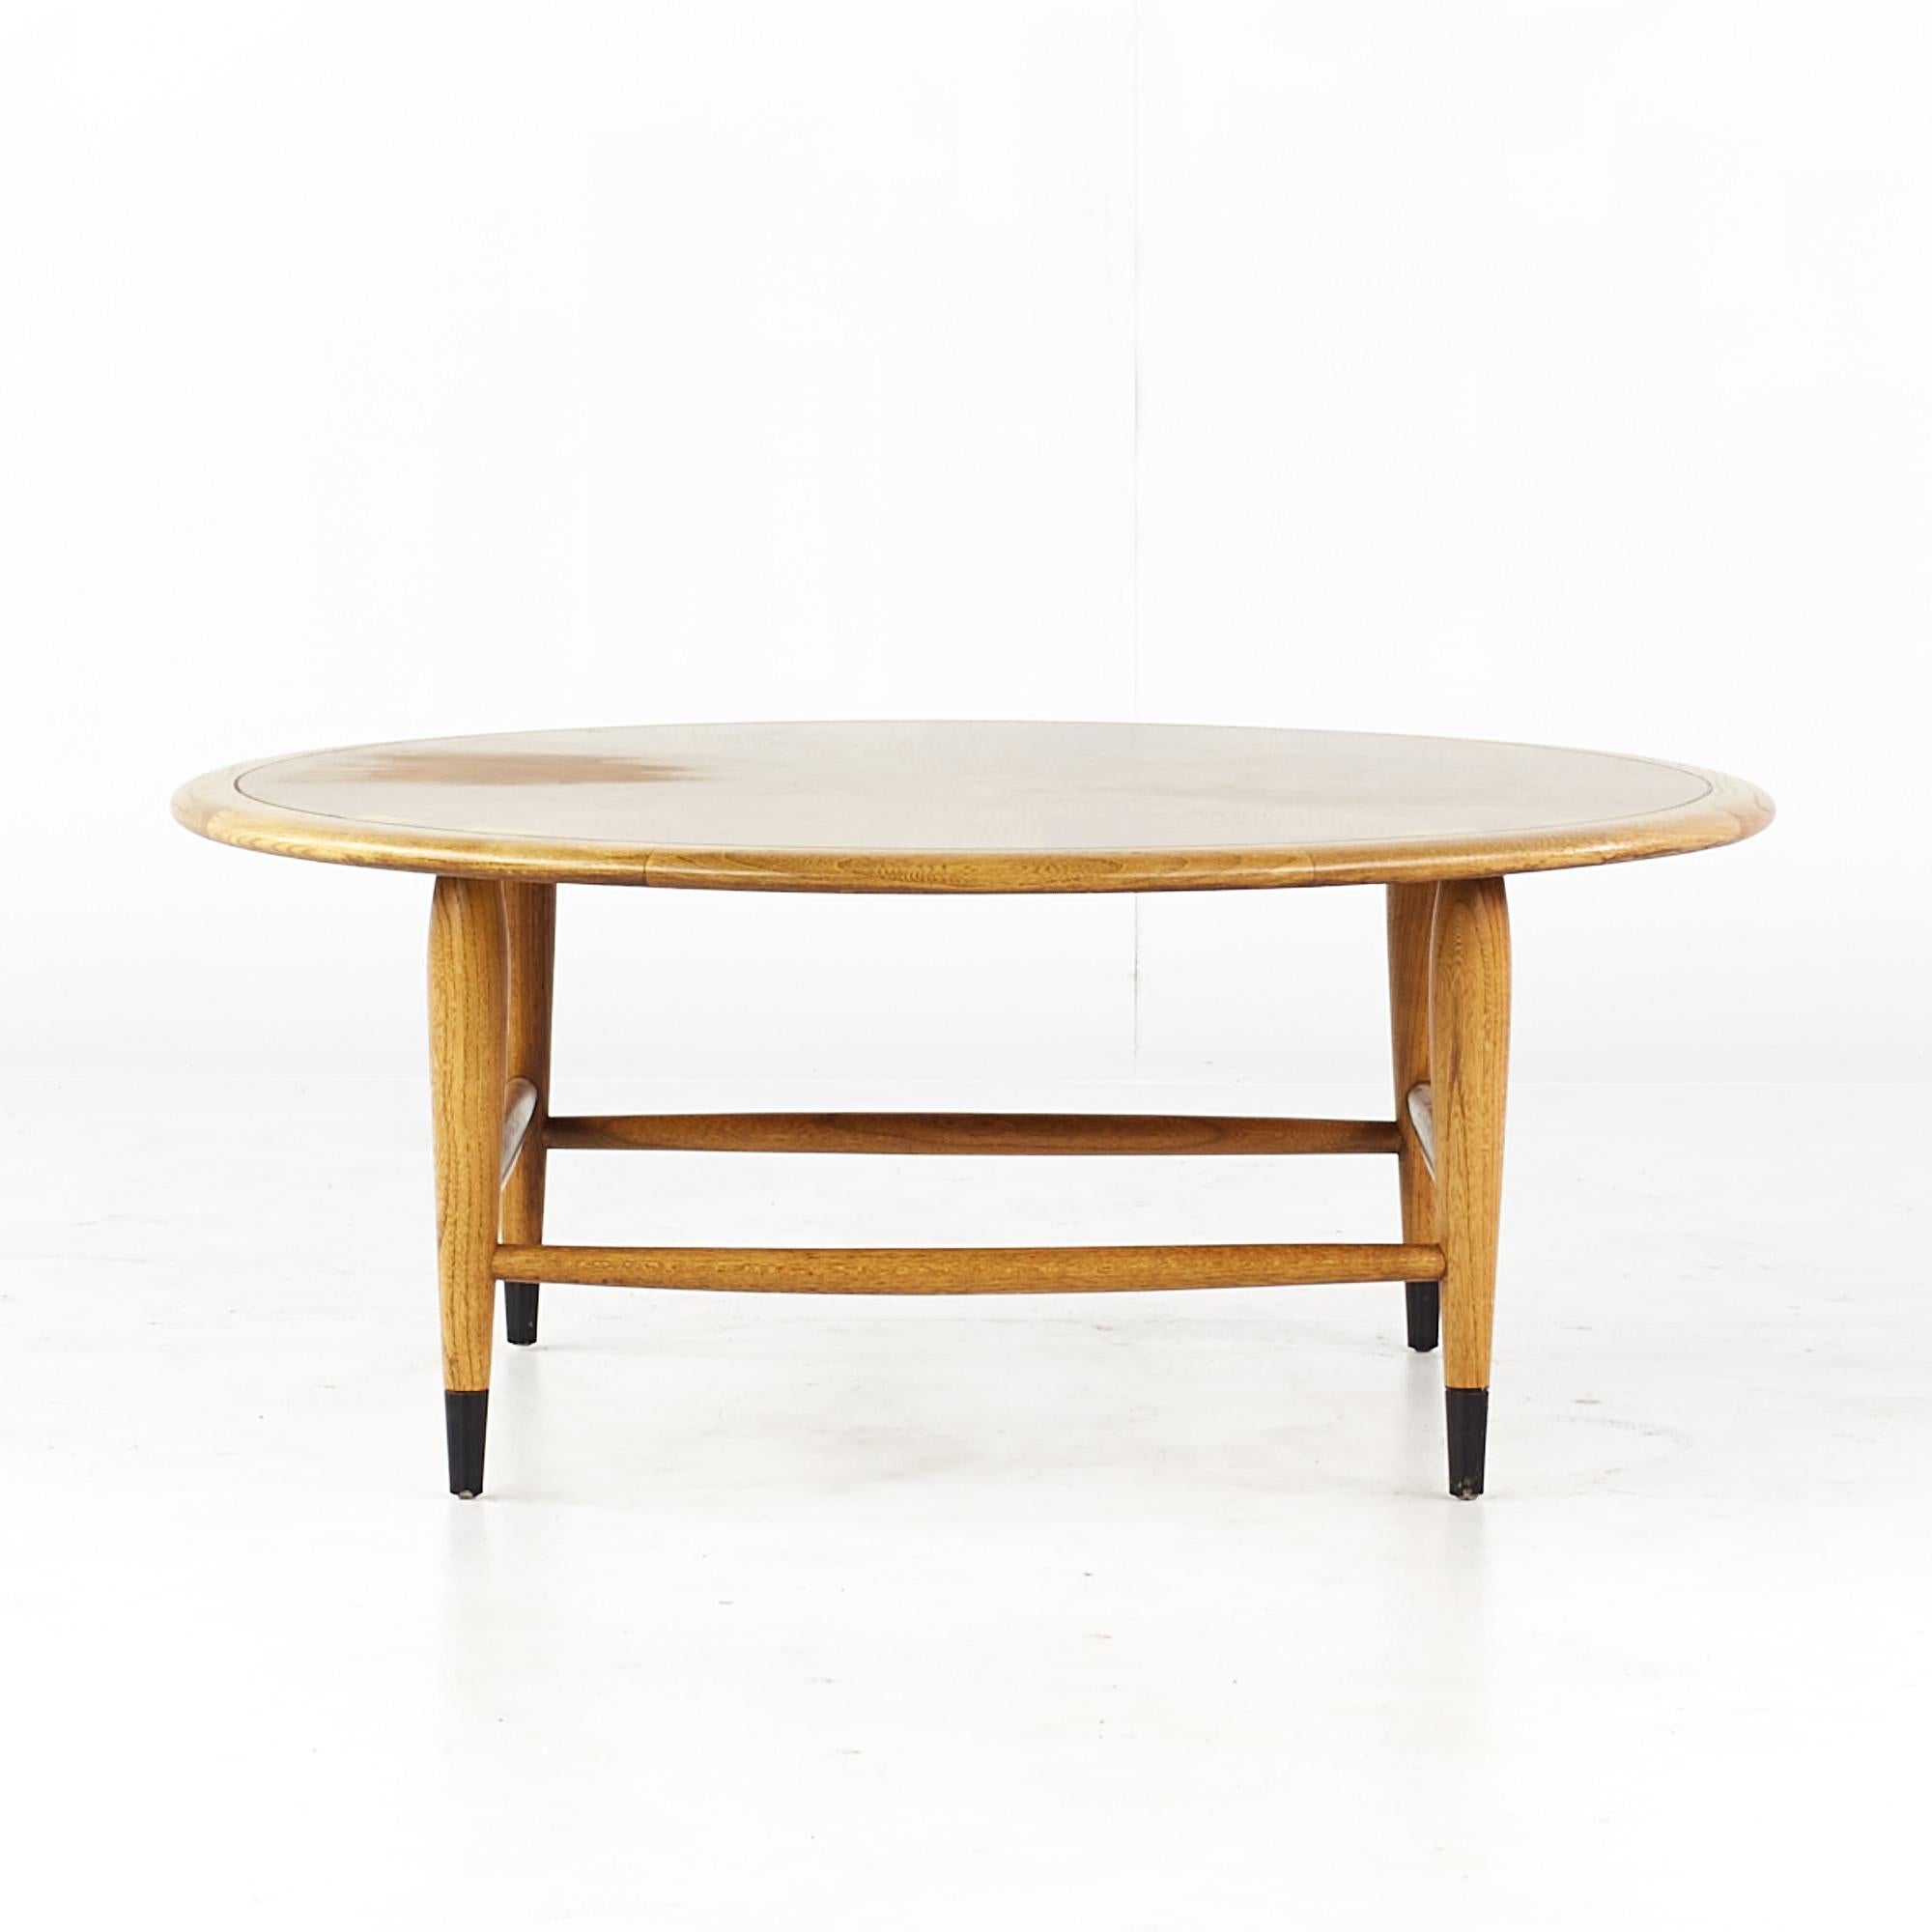 Lane Acclaim mid century round dovetail inlay coffee table

This table measures: 36 wide x 36 deep x 14.5 inches high

All pieces of furniture can be had in what we call restored vintage condition. That means the piece is restored upon purchase